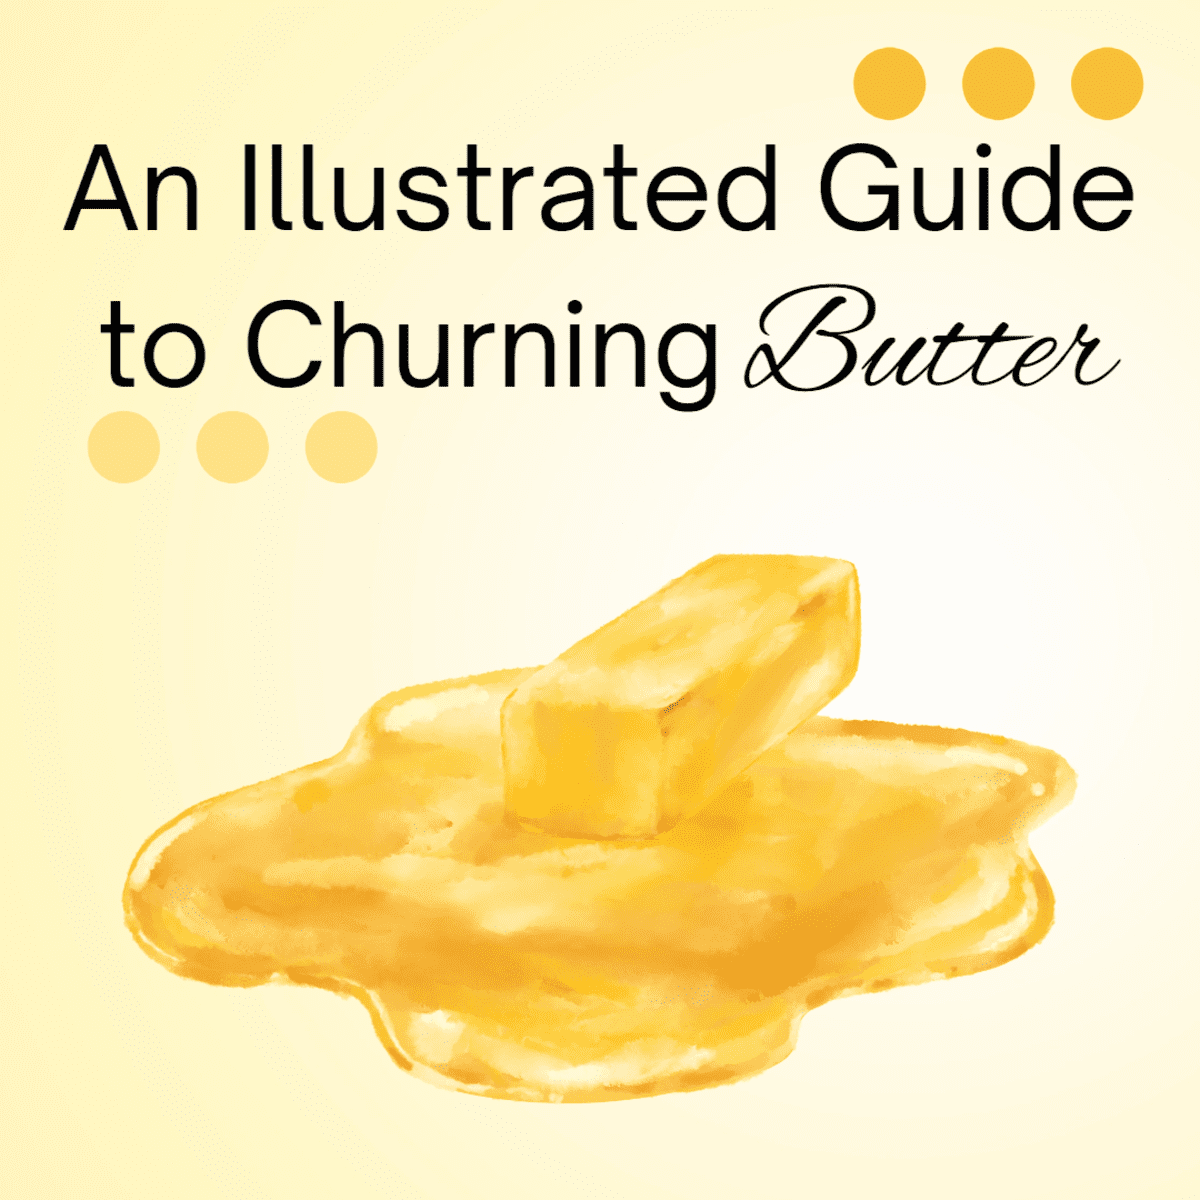 https://images.saymedia-content.com/.image/ar_1:1%2Cc_fill%2Ccs_srgb%2Cq_auto:eco%2Cw_1200/MTkzODM1OTQyNDc2MjYwODQ4/an-illustrated-guide-to-churning-goat-butter.png